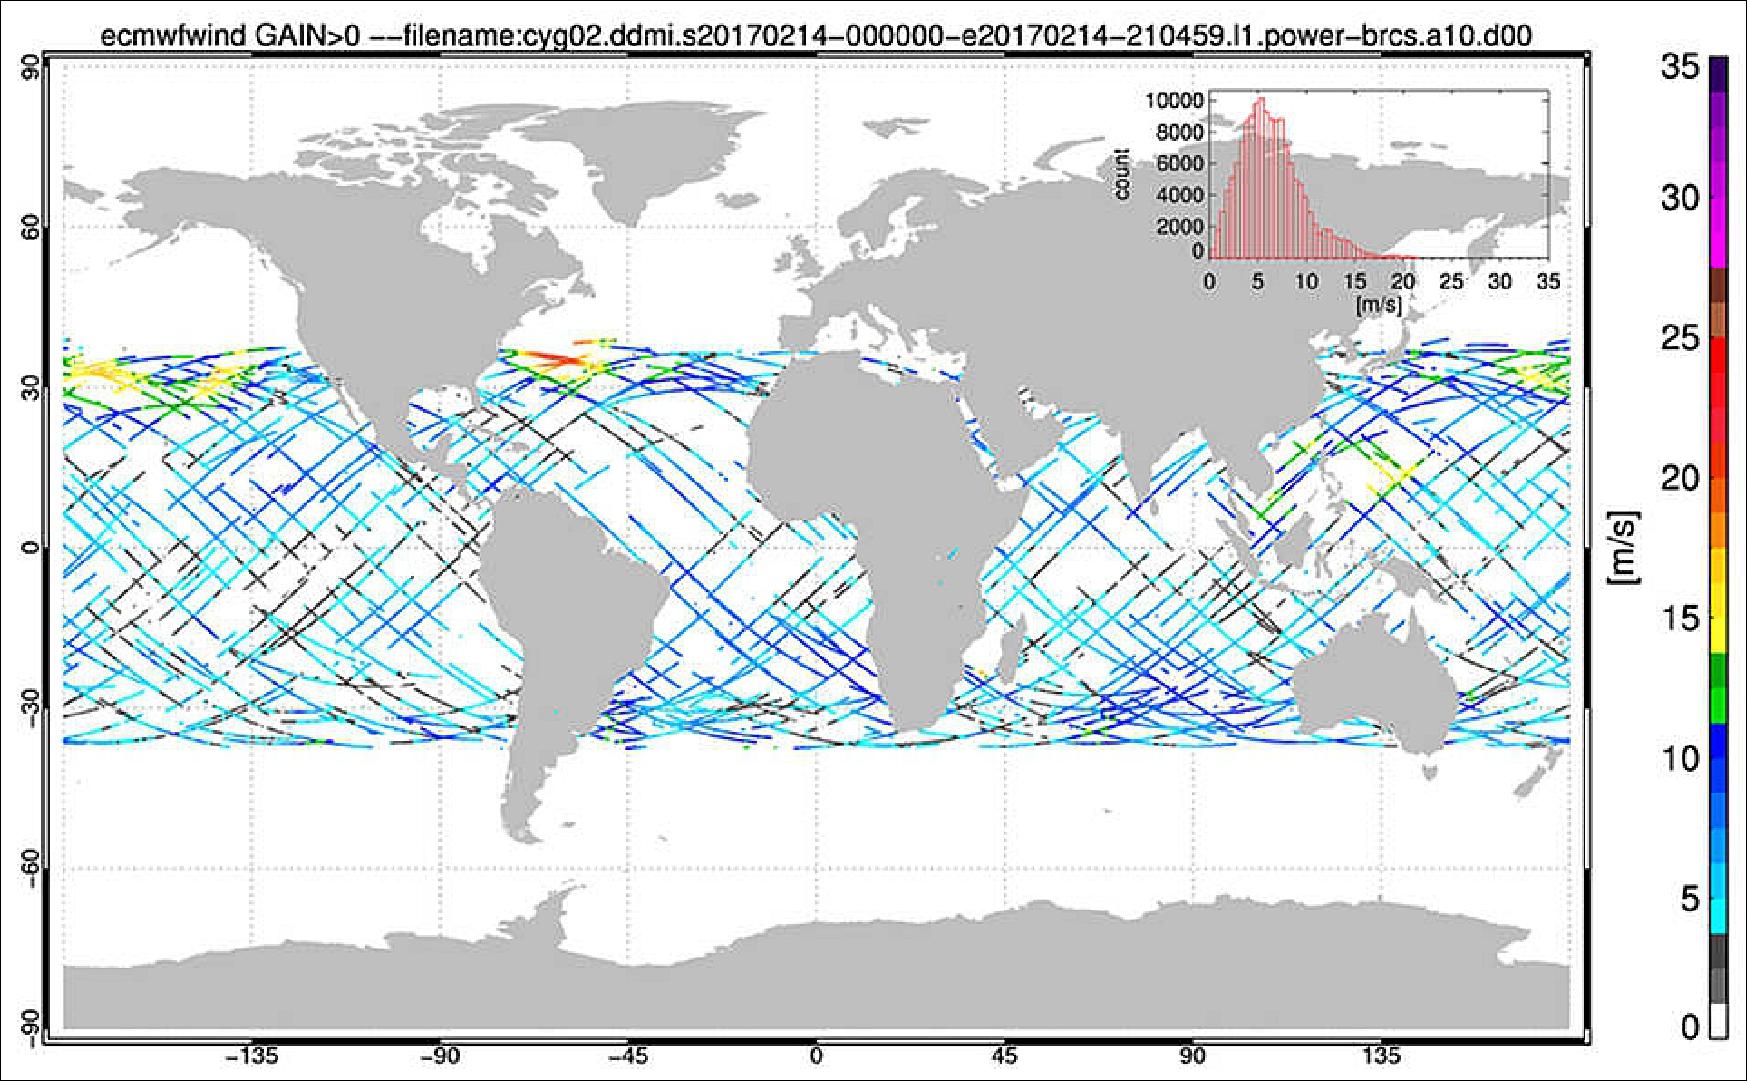 Figure 39: This map shows the coverage of ocean surface wind measurements made by one of the eight spacecraft that make up the CYGNSS constellation over the course of 4 orbits (approximately 6 hours) on February 14, 2017. The blue values indicate relatively low wind speeds, while the yellow, orange, and red values indicate increasingly higher wind speeds. The highest wind speeds in this image (orange and red) are associated with a powerful extratropical cyclone that moved off the East Coast of North America (image credit: NOAA/NASA/University of Michigan)